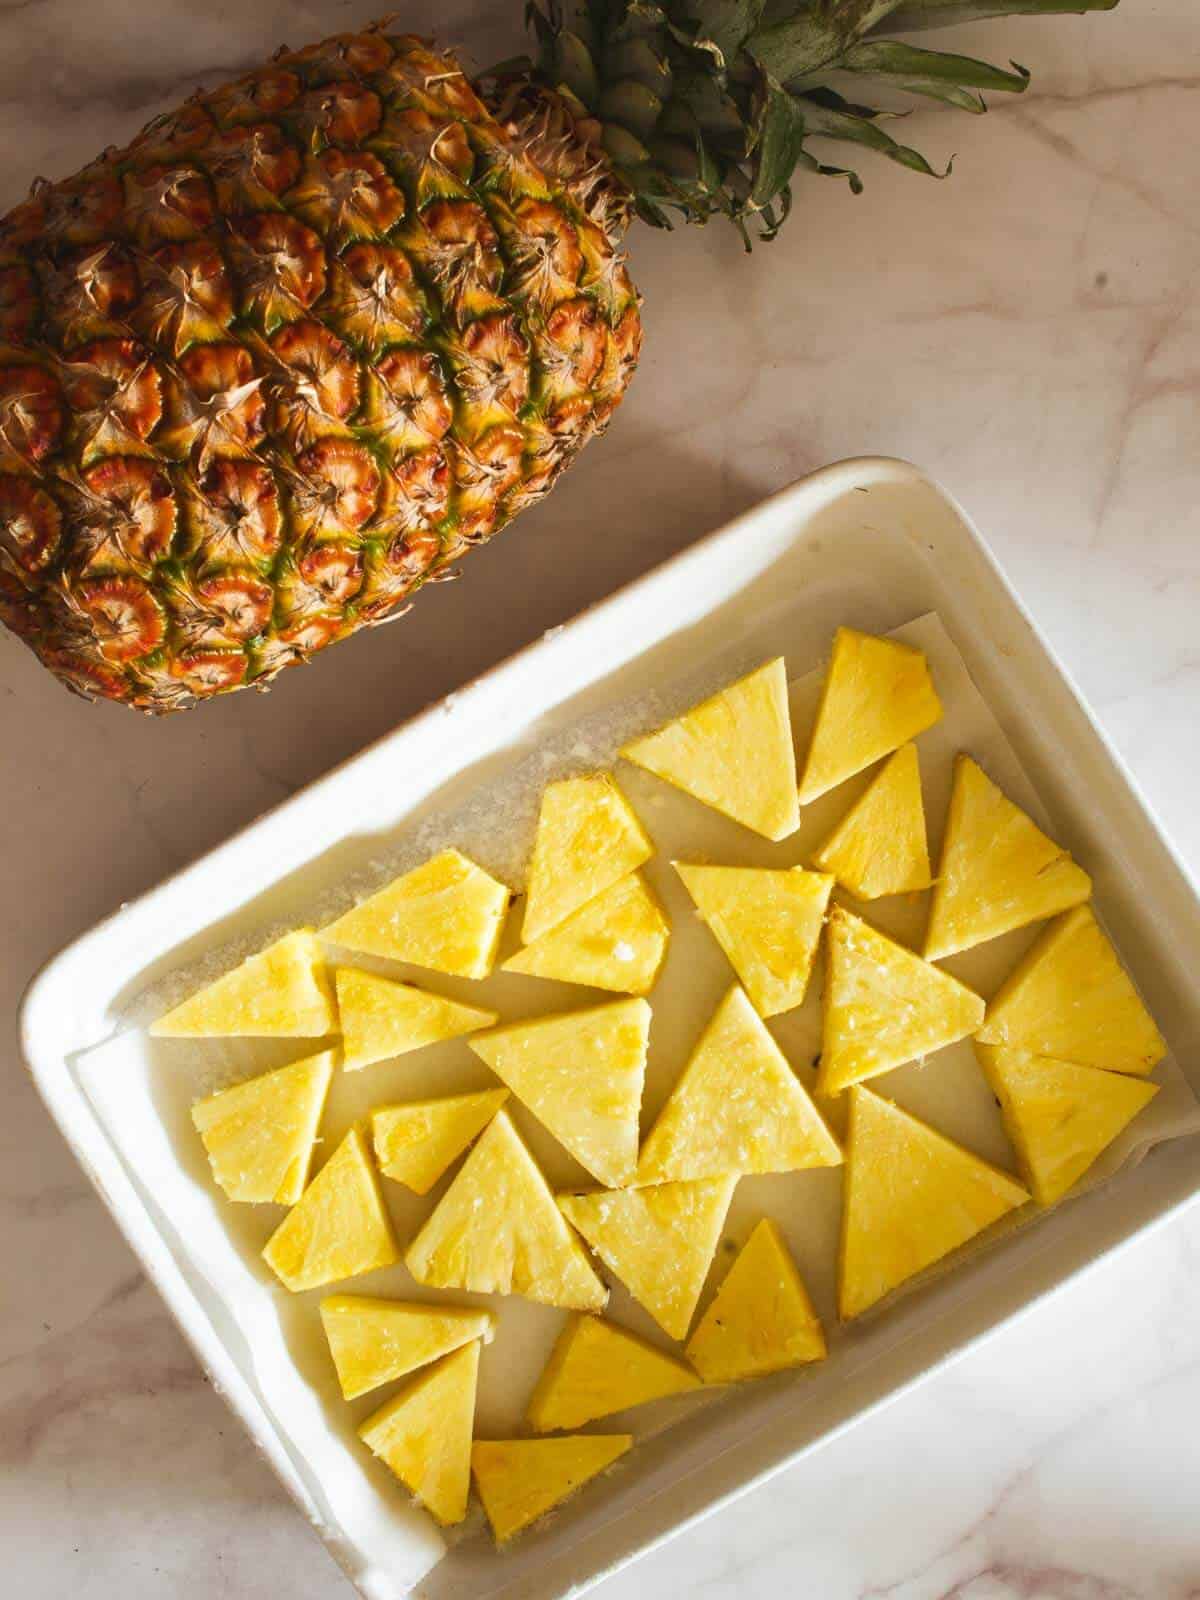 freeze pineapple chunks in a baking sheet with parchment paper